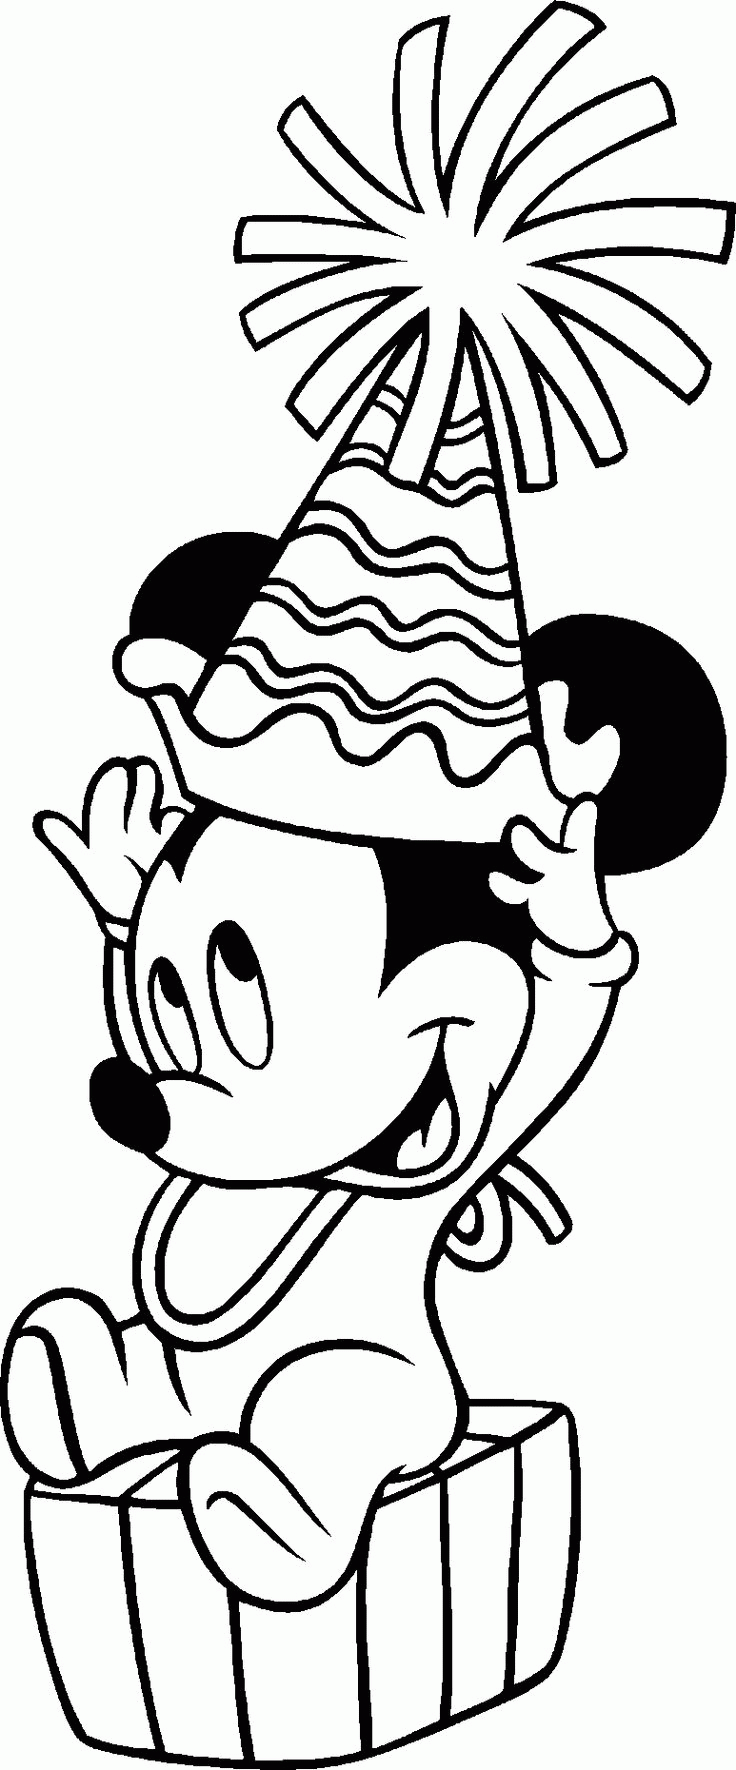 baby mickey coloring page | Kids - at home art for kids ...